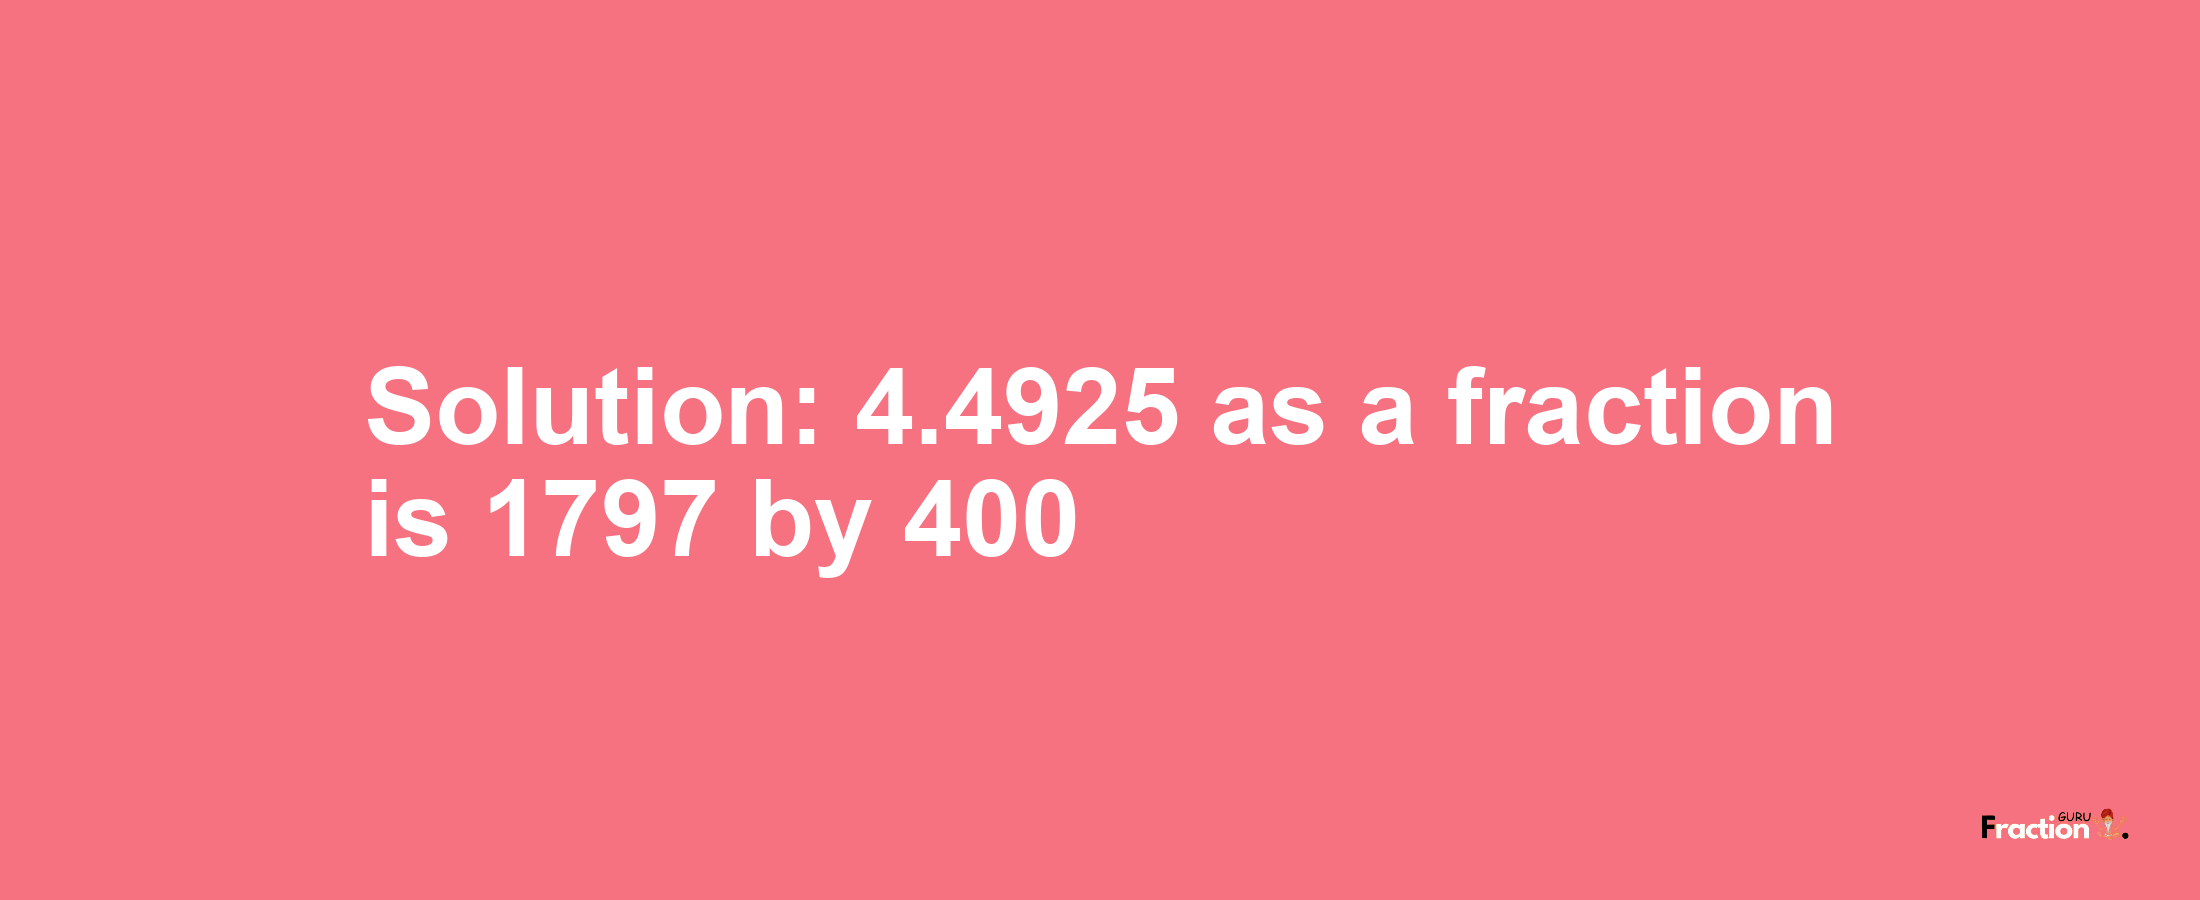 Solution:4.4925 as a fraction is 1797/400